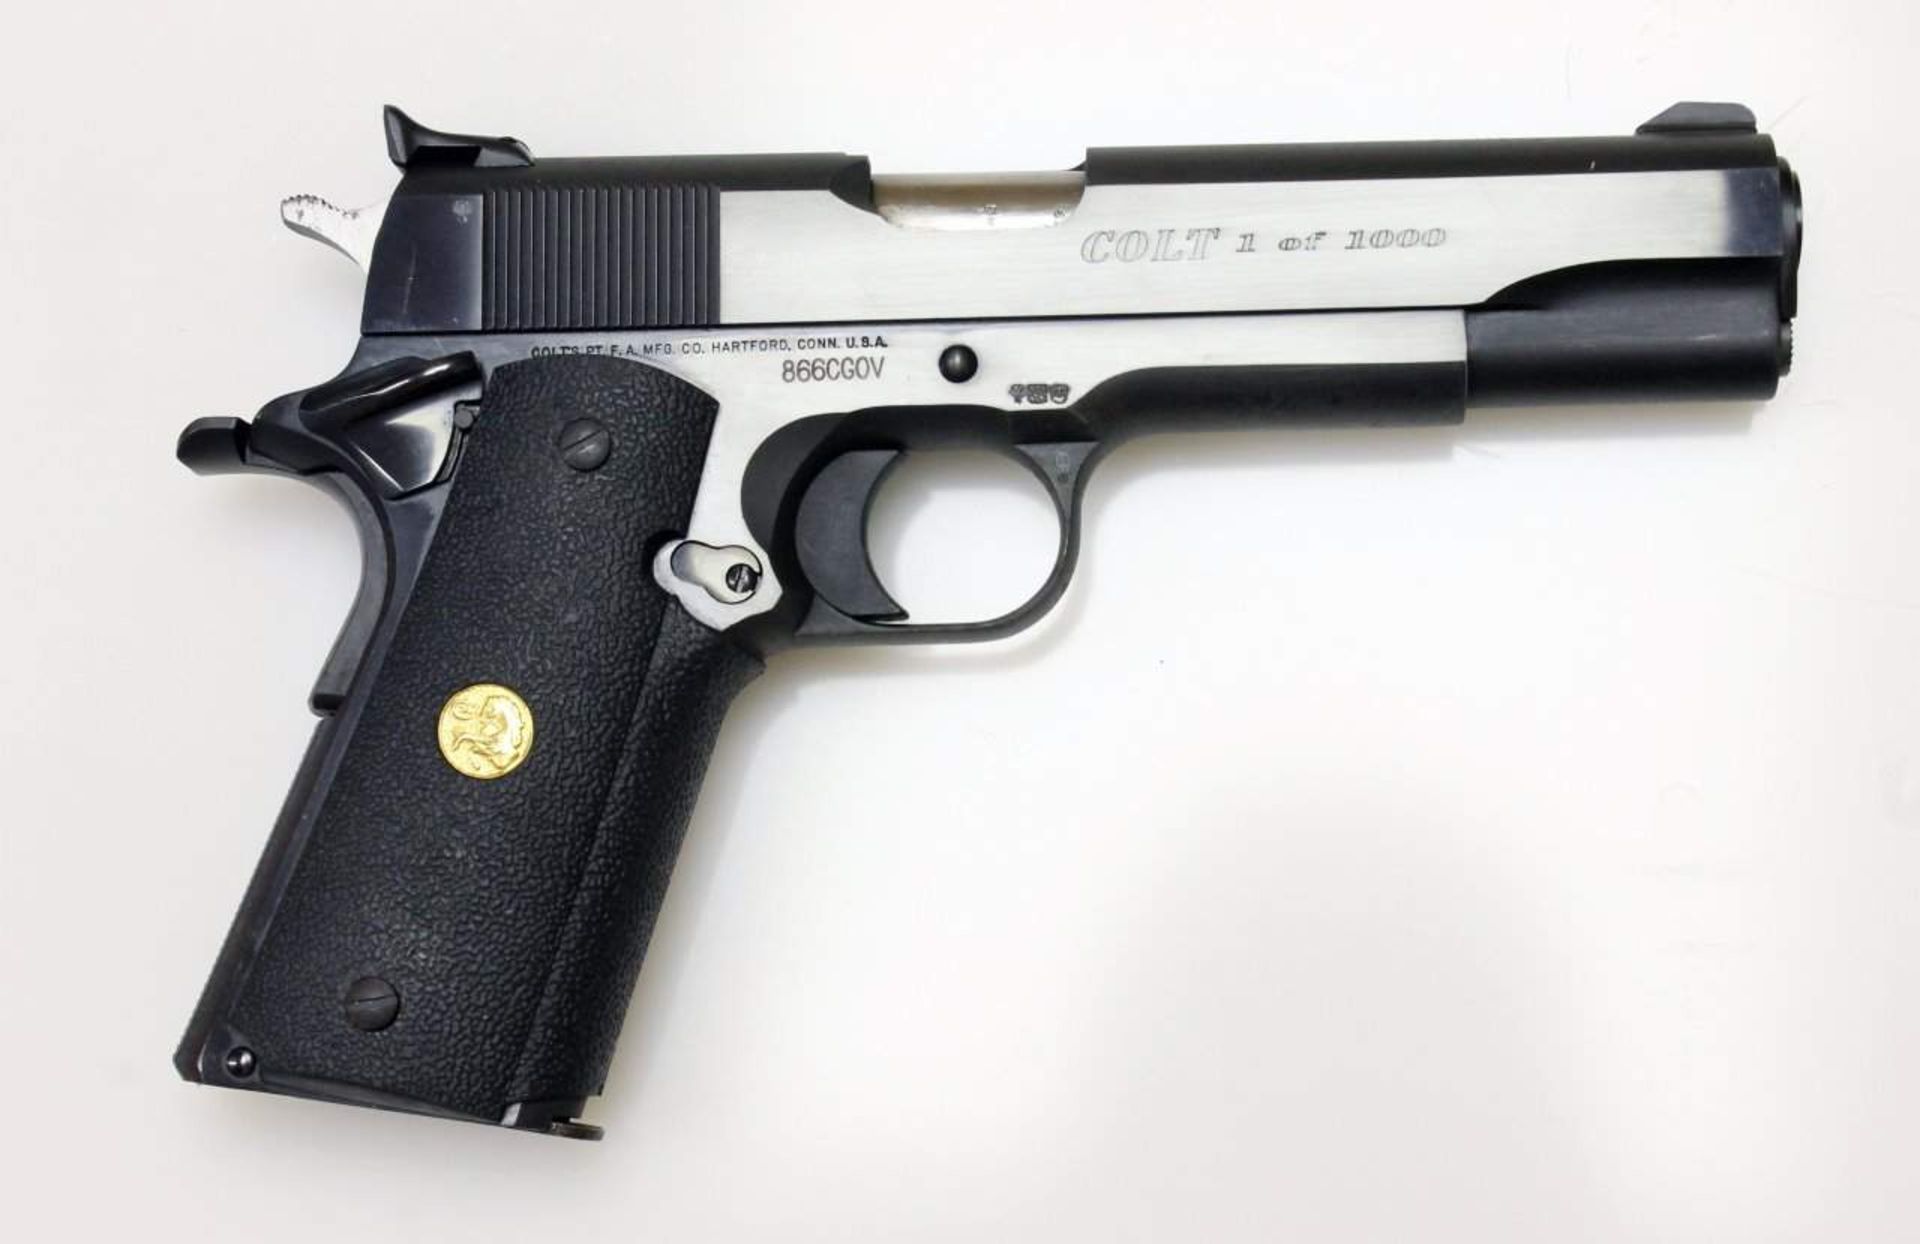 Selbstladepistole Colt, Modell: 1911 Custom Government - 1 of 1000 Cal. .45 ACP, S/N: 066CG0V,